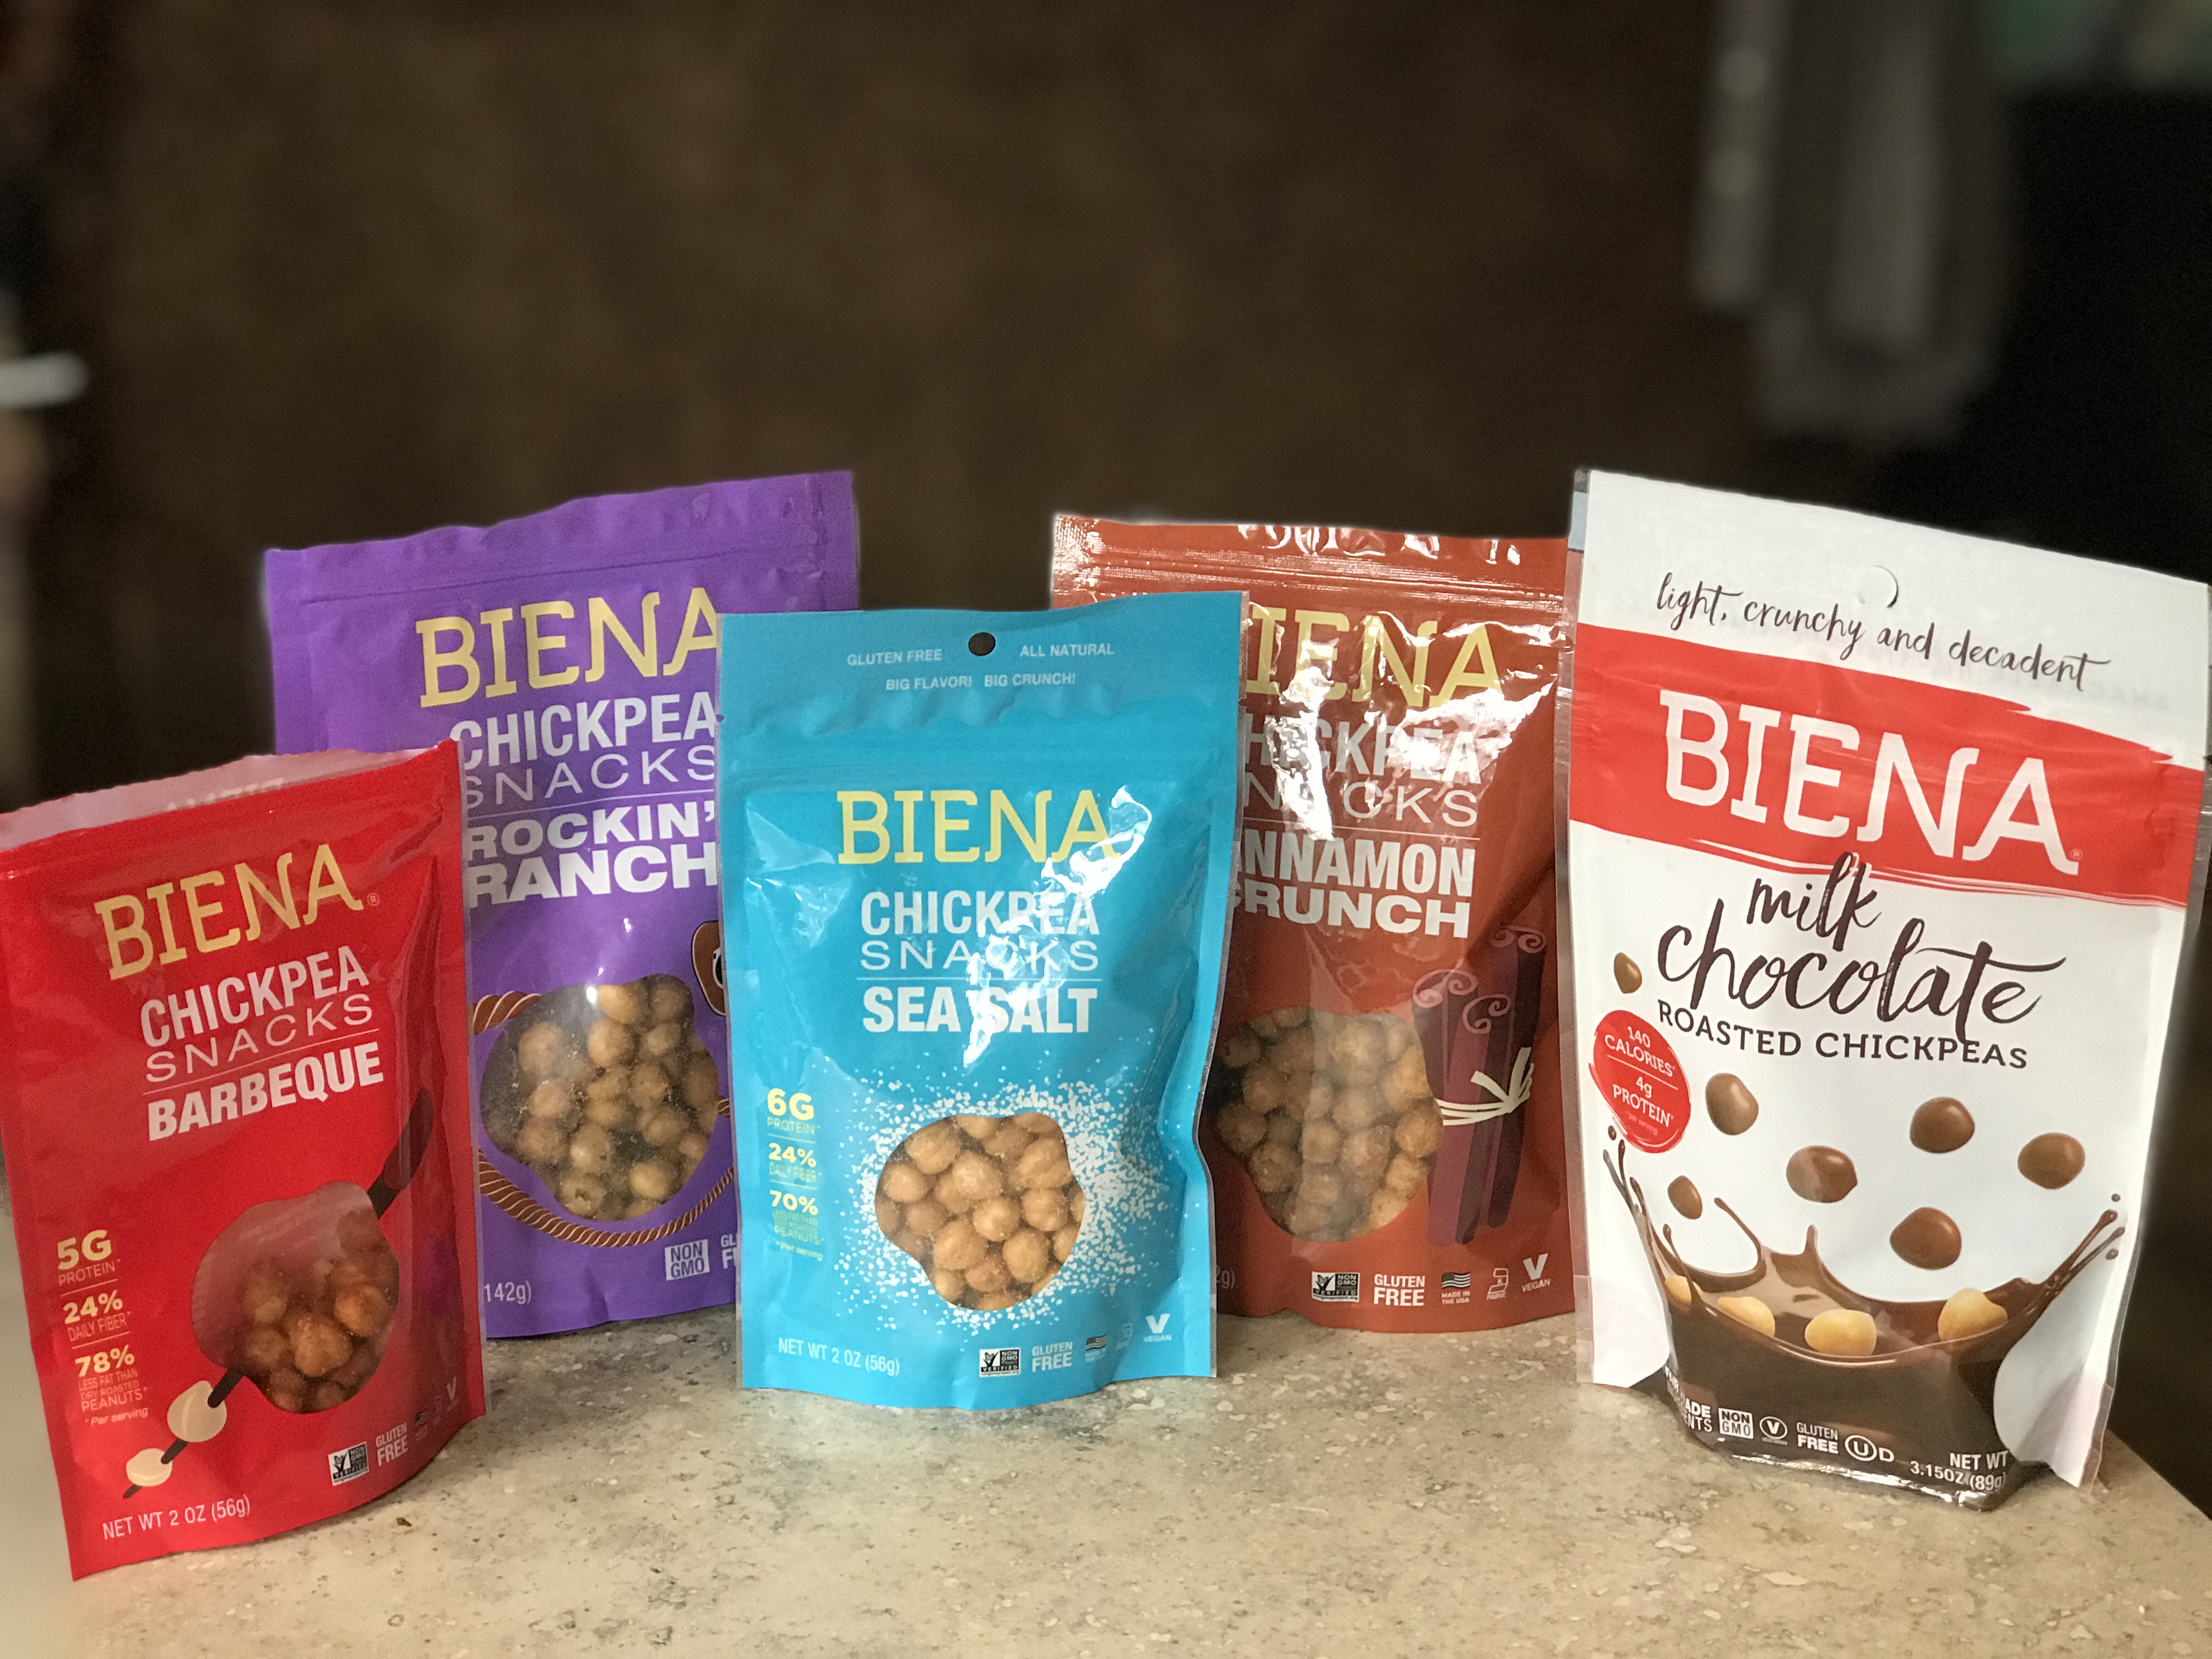 Holiday gift Guide 2017 for men Stocking Stuffers BIENA Chickpea snacks